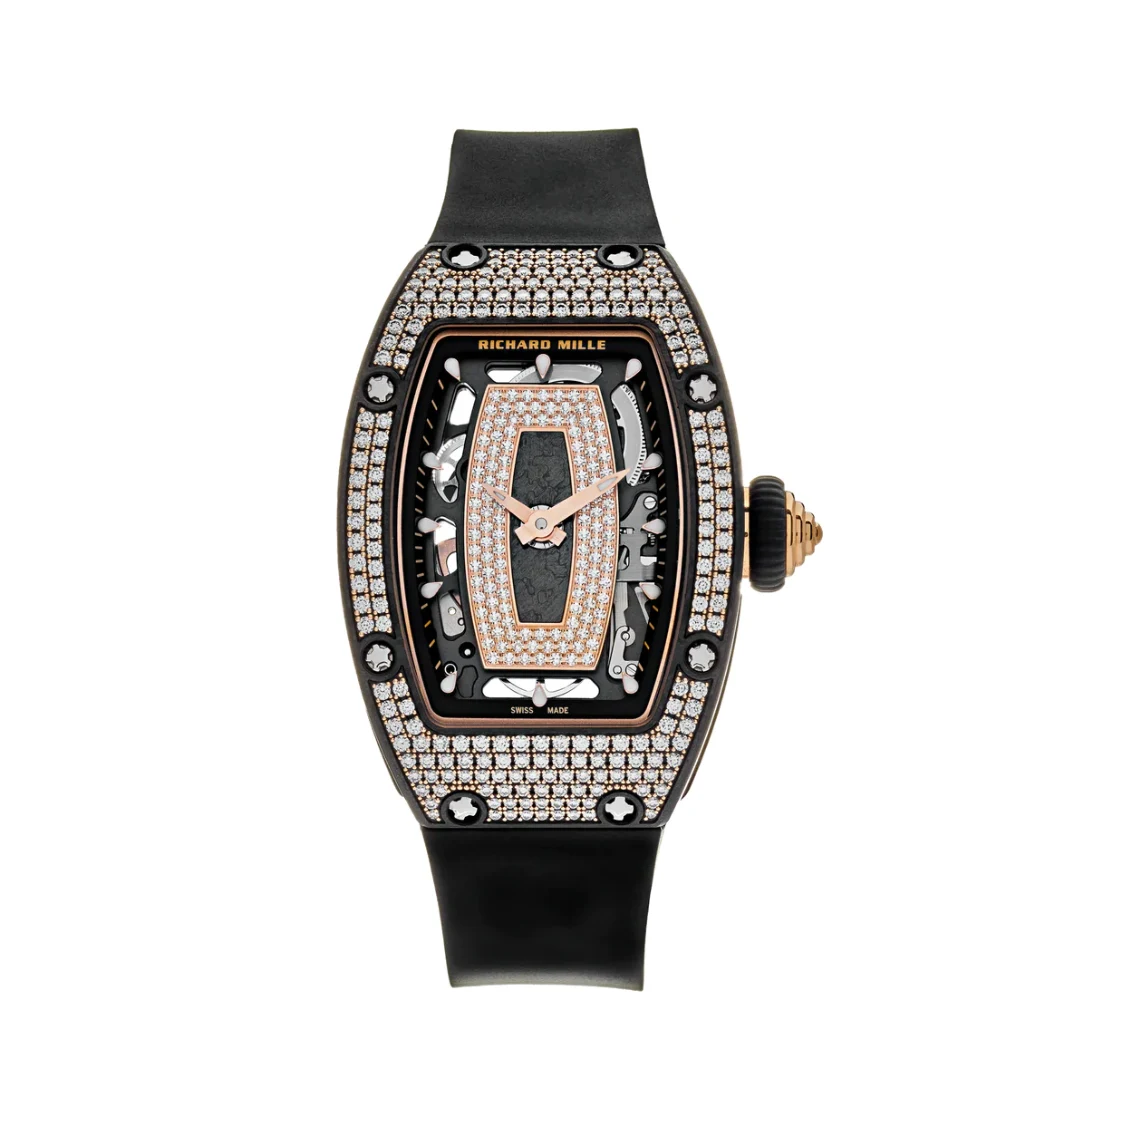 2020 Richard Mille Automatic Ladies Watch Carbon TPT and Diamond-Set RM07-01 Listing Image